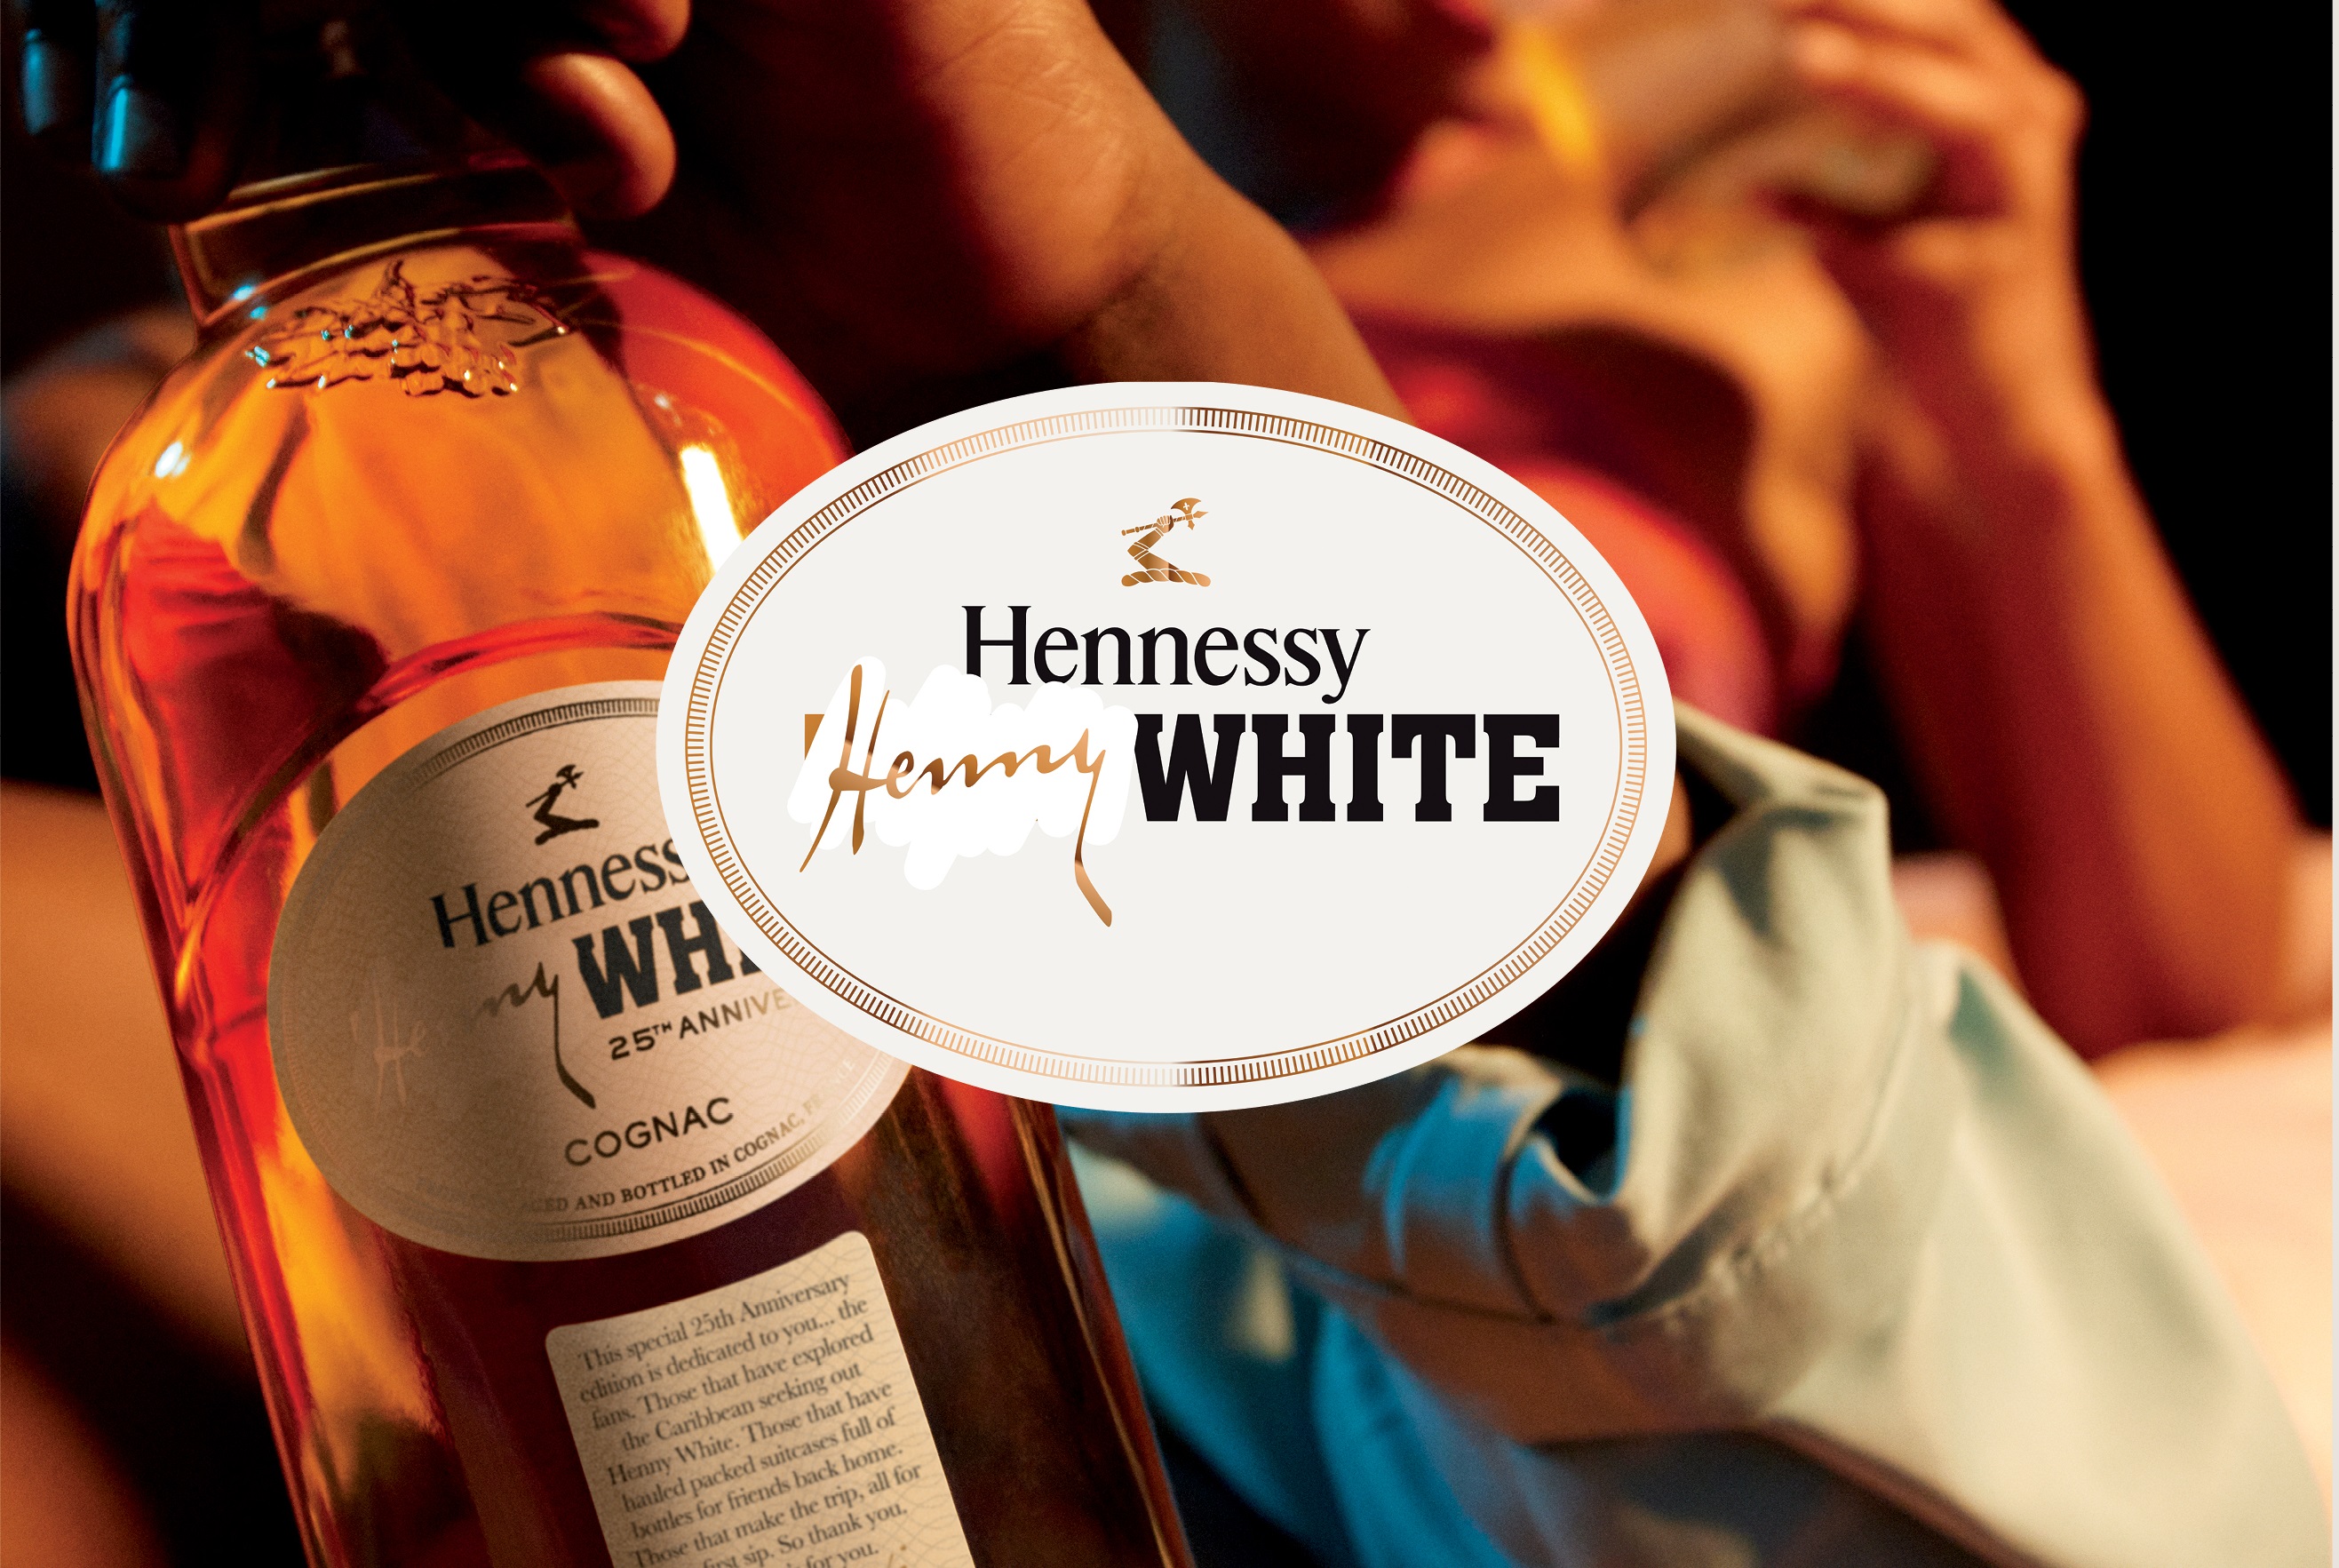 Hennessy Celebrates 25th Anniversary of 'Henny White' with Limited-Edition U.S. Release